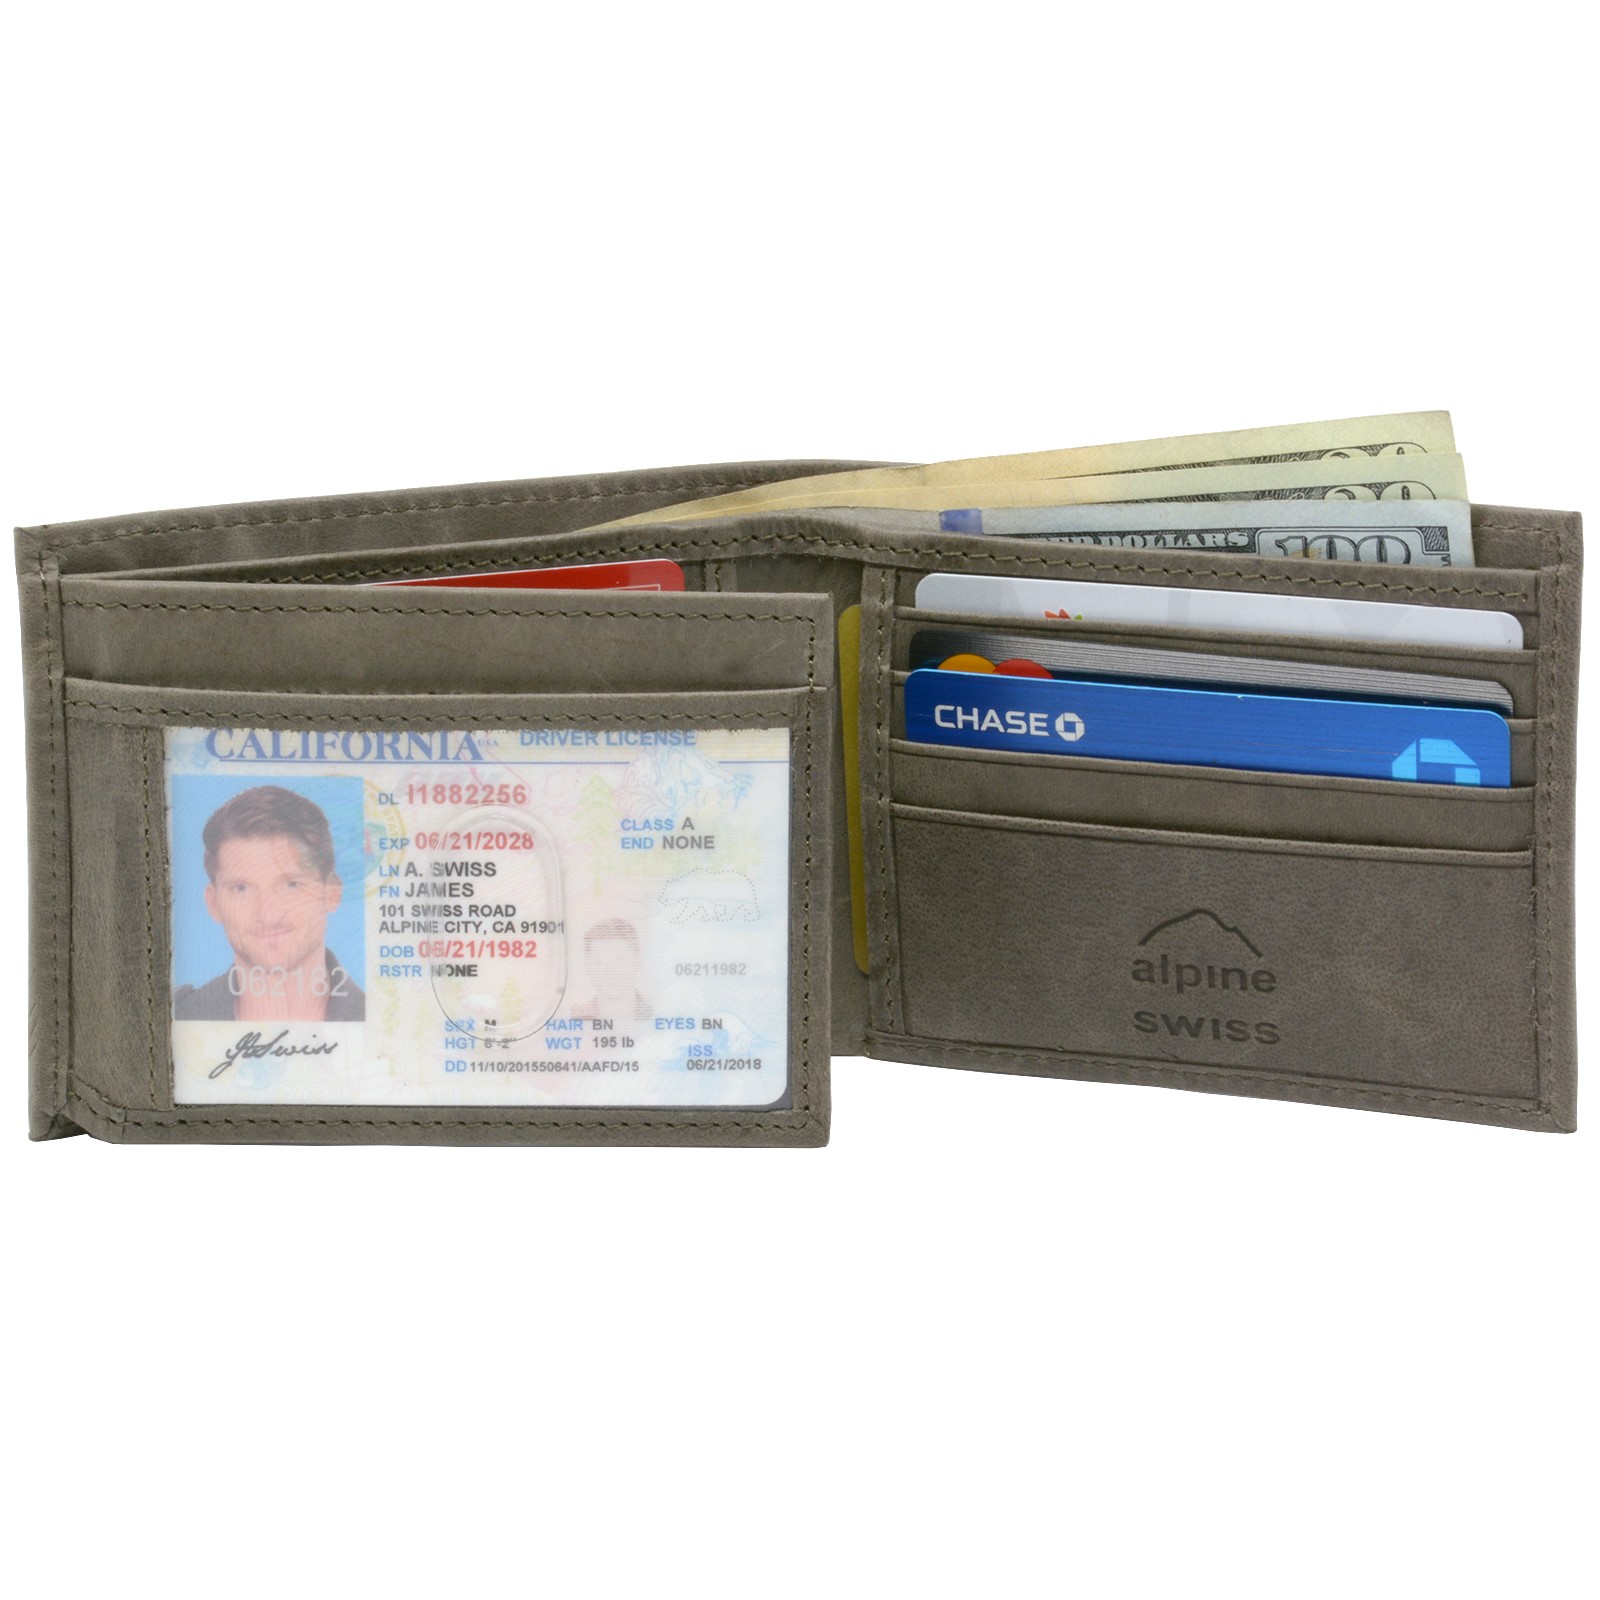 Alpine Swiss Mens Wallet Real Leather Bifold Trifold Hybrid Foldout ID Card Case - image 2 of 4